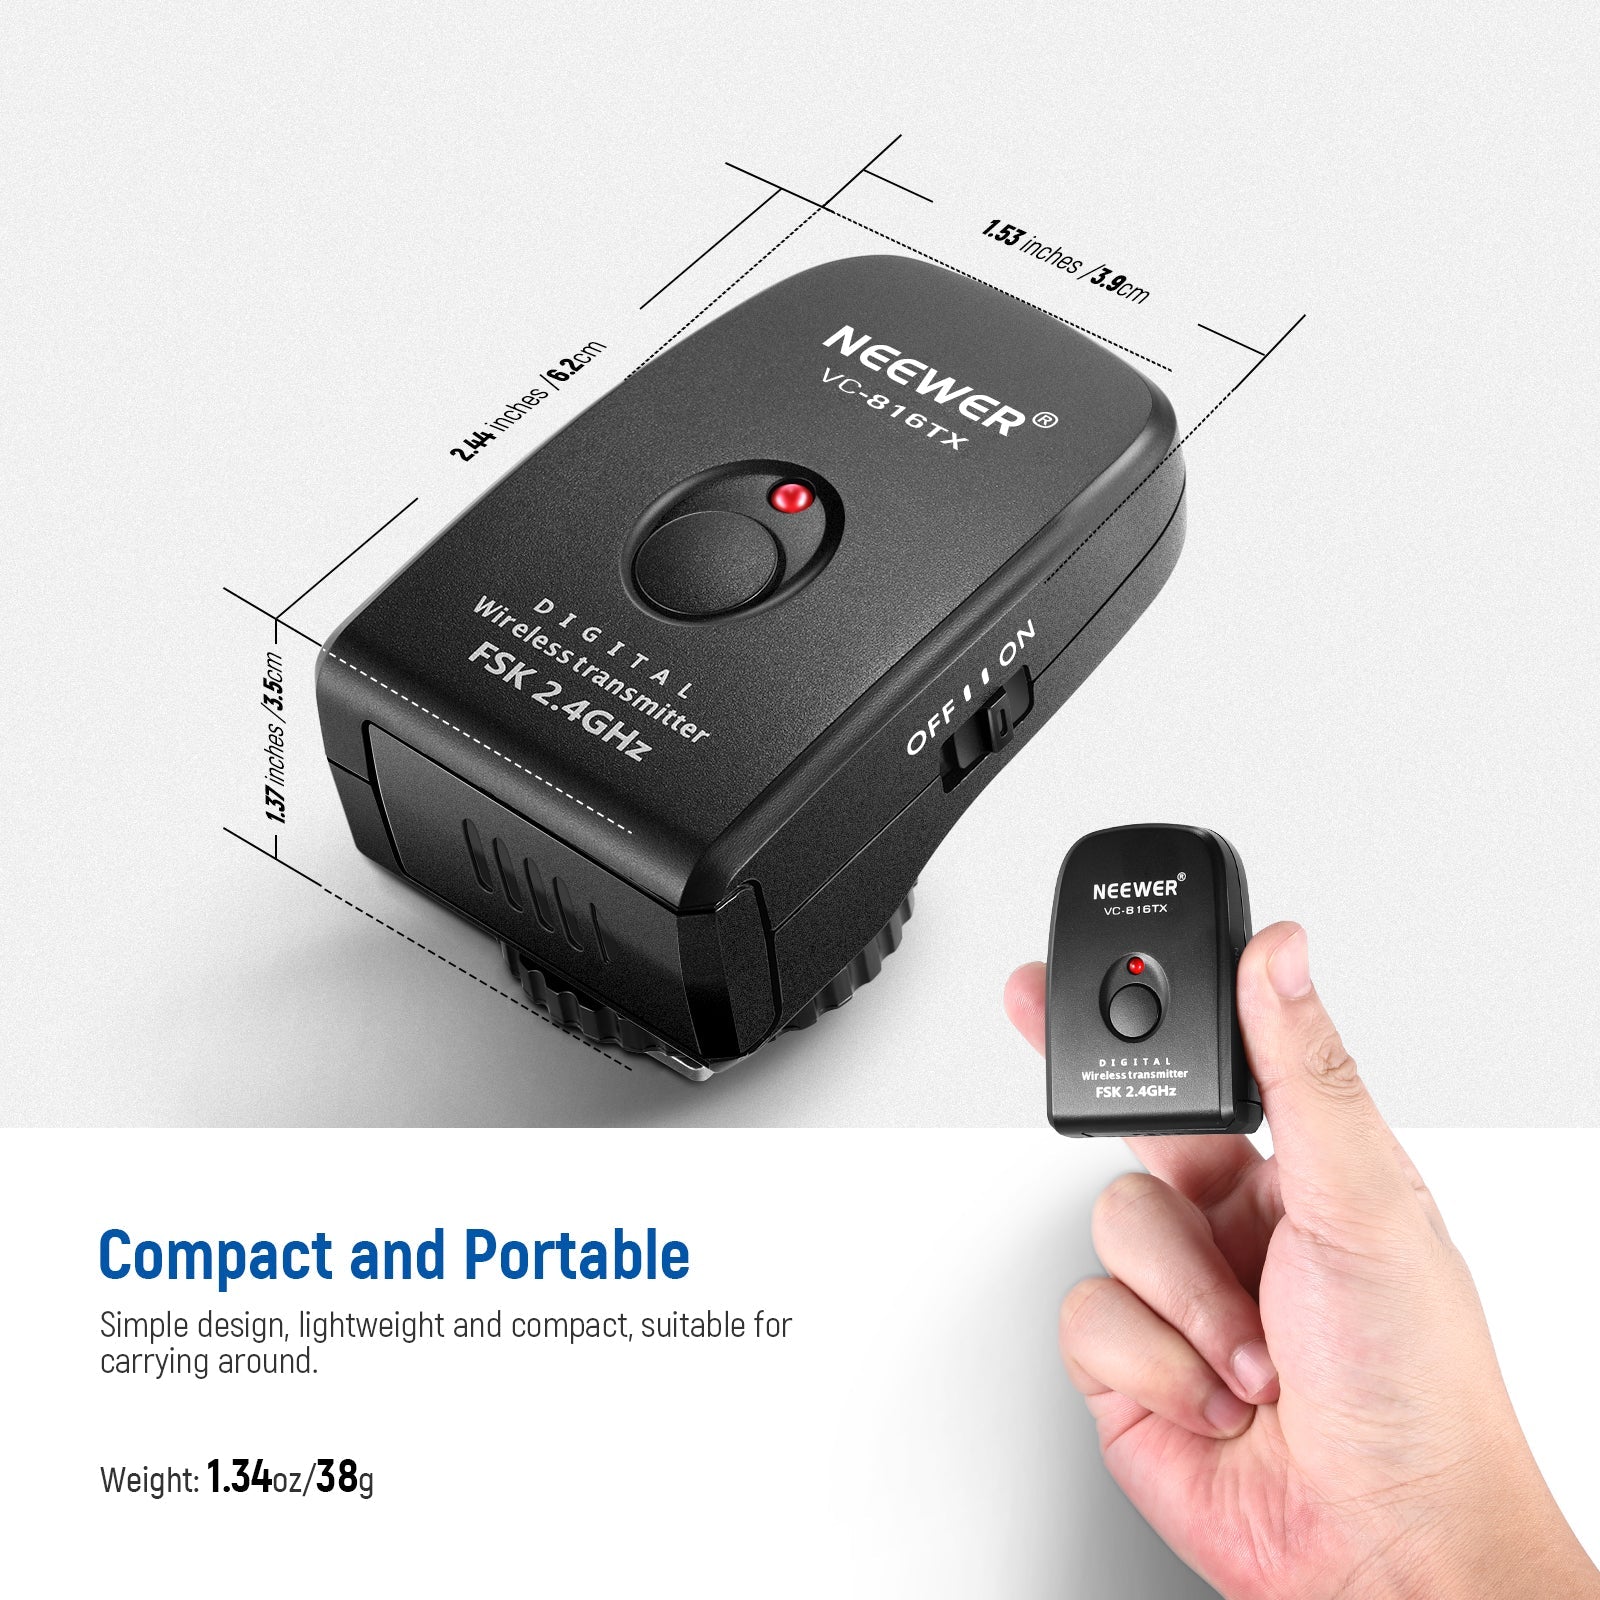 NEEWER VC-816TX Wireless Trigger for Vision4 & ML300 - NEEWER 